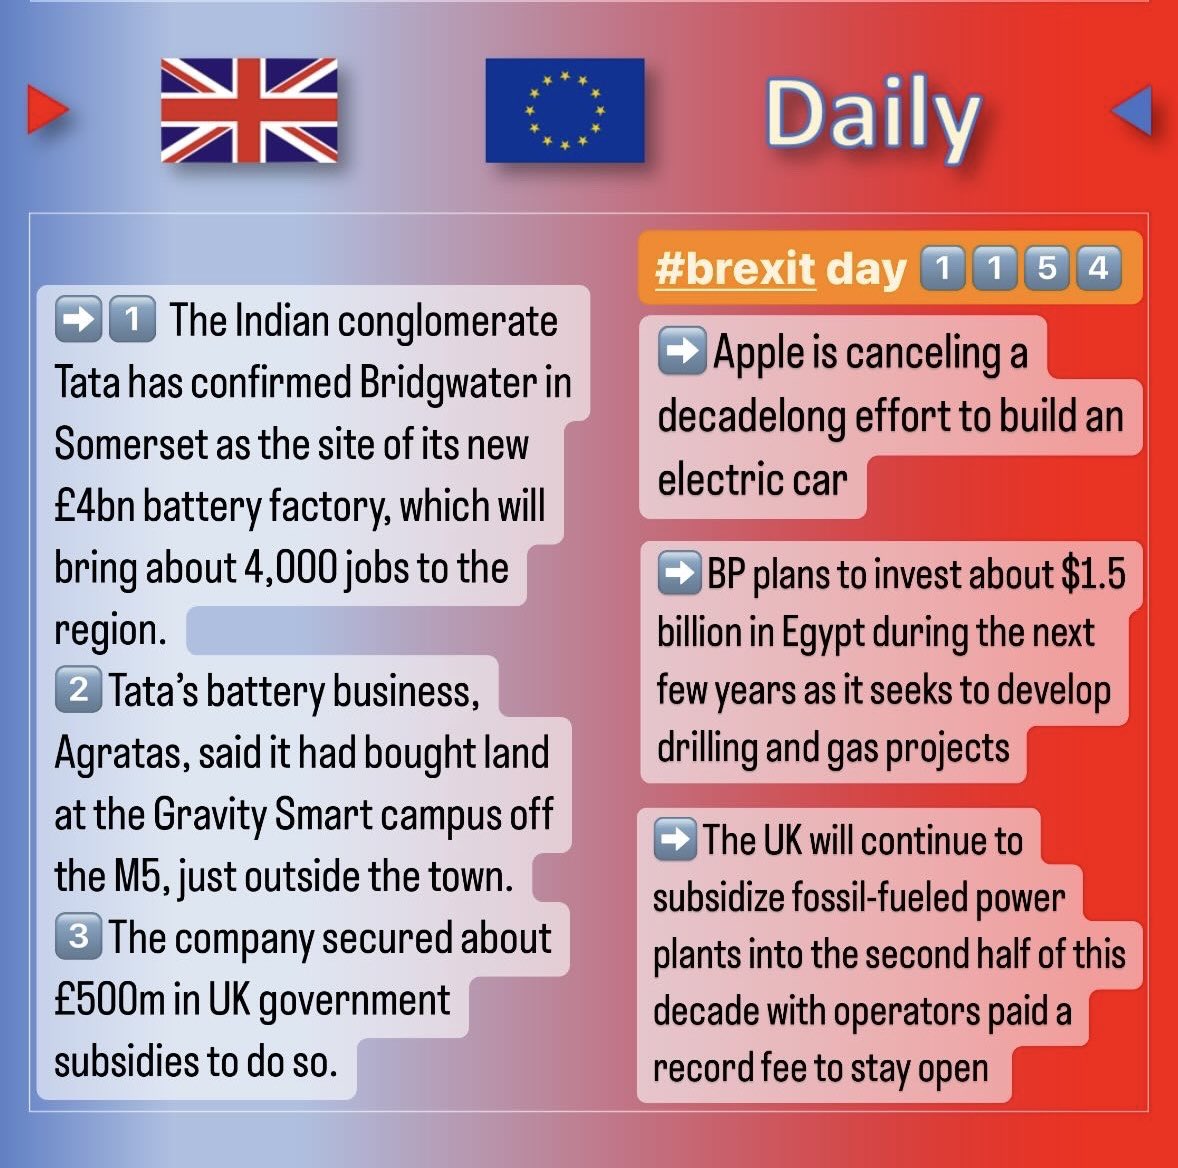 #Brexit daily #BrexitNews day 1️⃣1️⃣5️⃣4️⃣ #energytransition #trade #supplychain #business #logistics #Logistik #trade #export #import #customs #Finance #motionfinity #finances #financialservices #GDP #ukca #research #Science #space